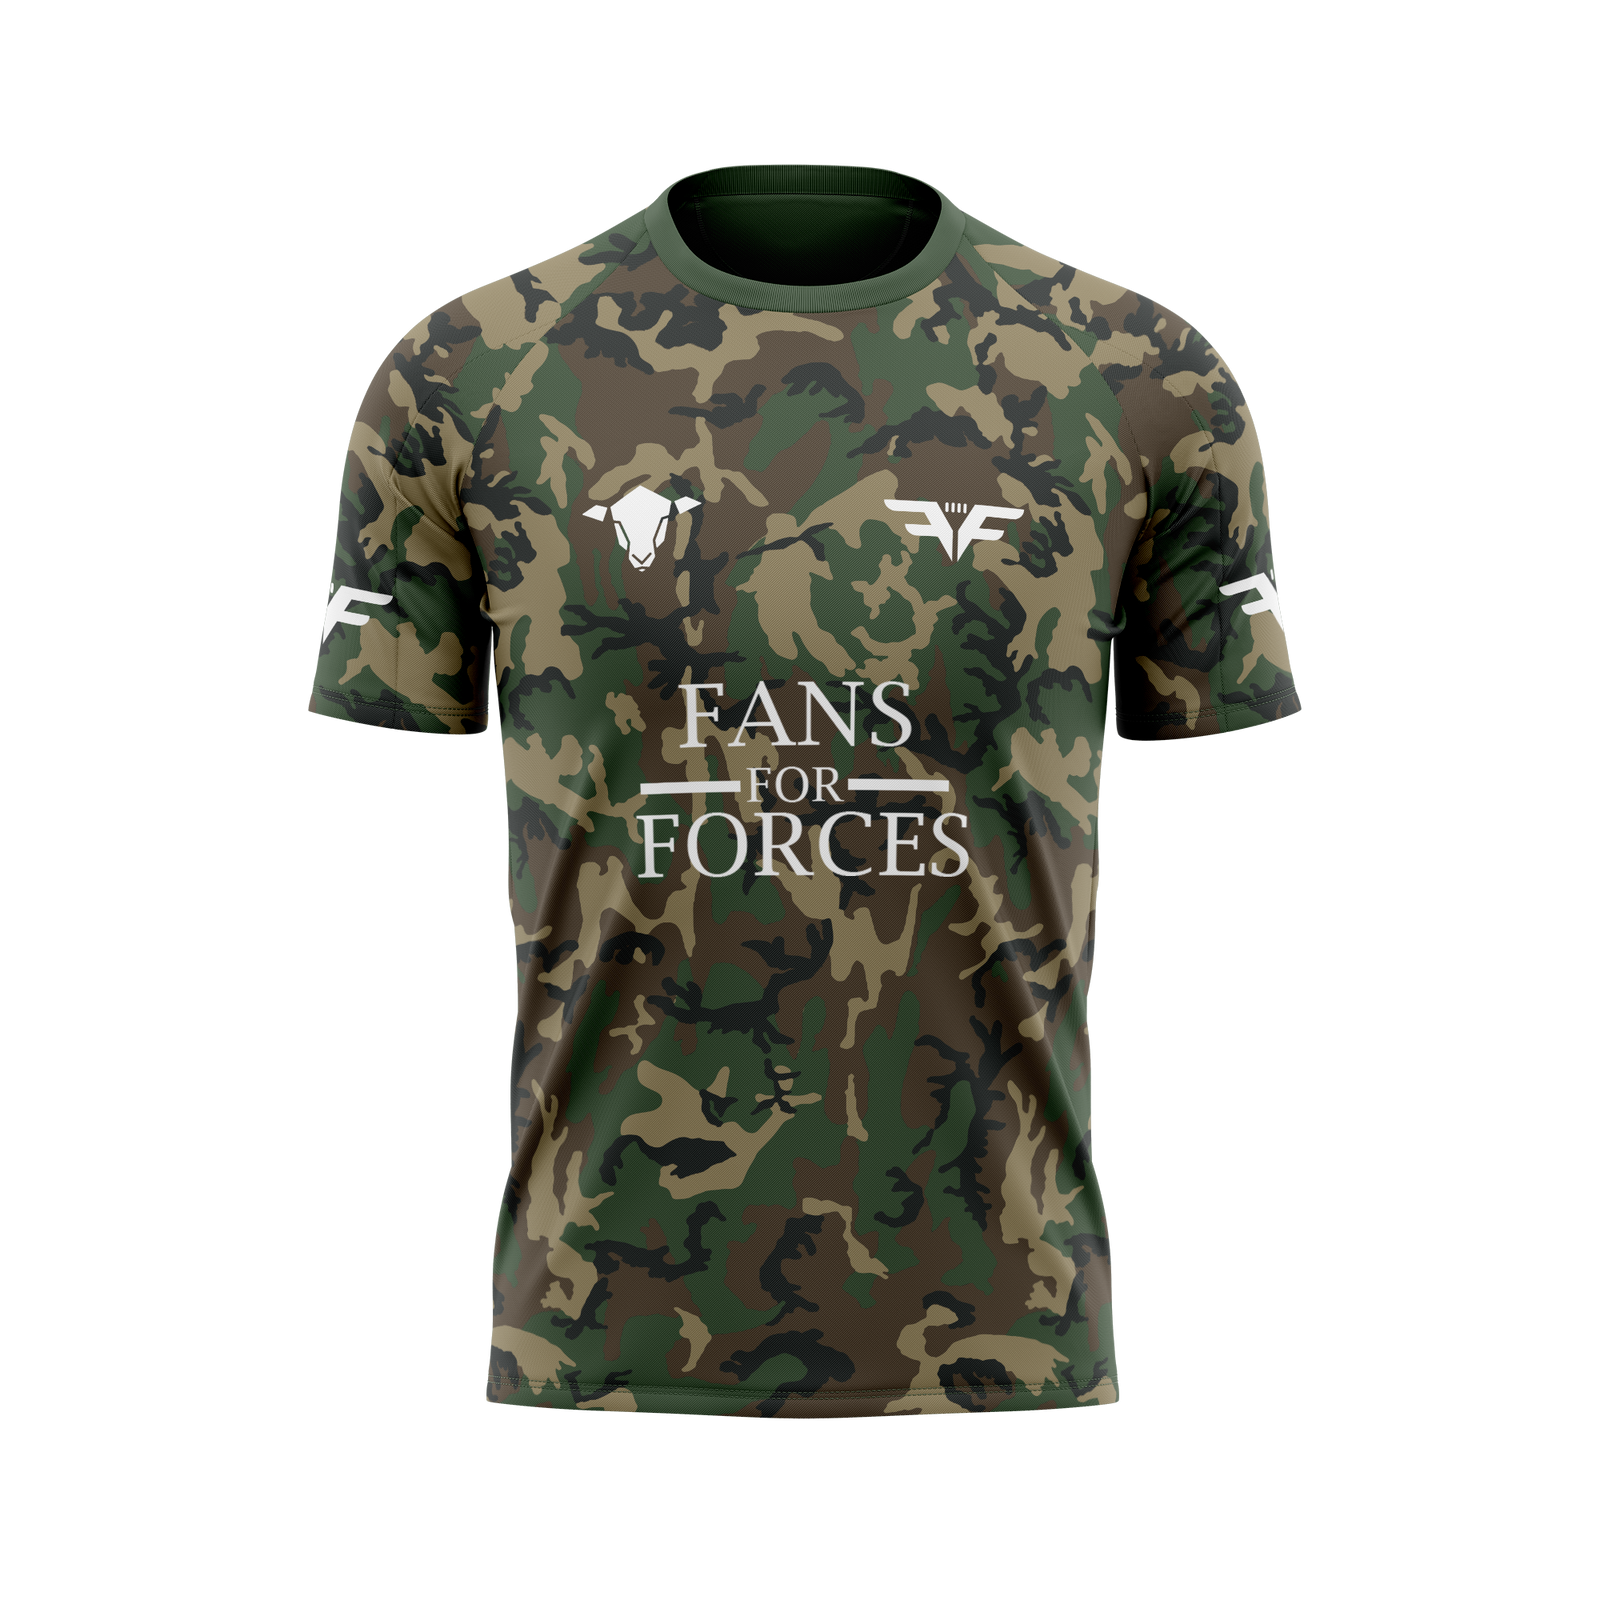 Ladies Fans for Forces Original Camo Charity Tee